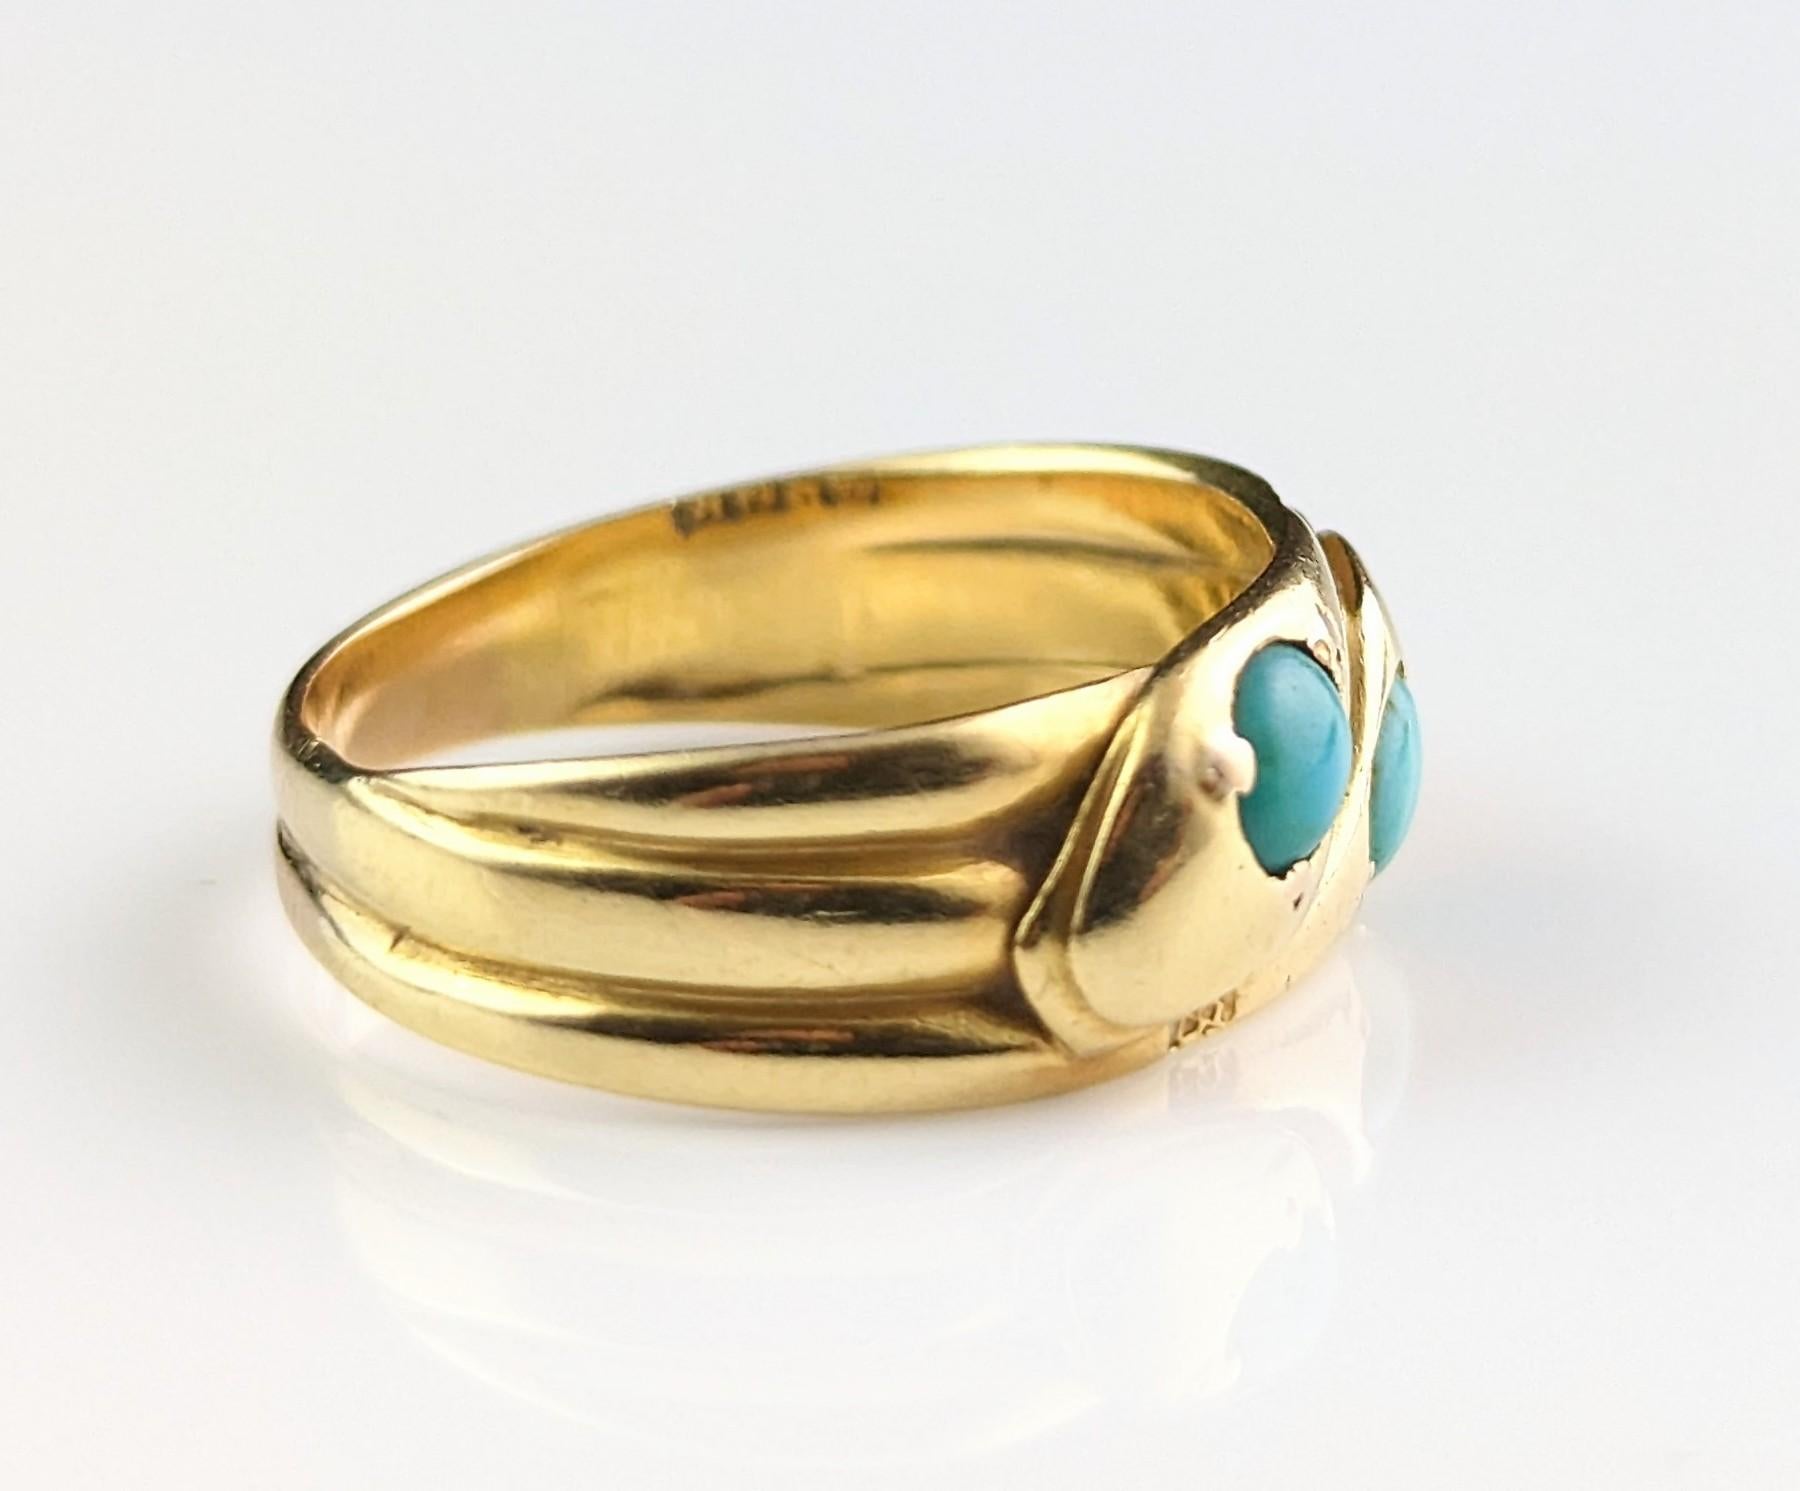 Antique 18k Gold Double Snake Ring, Turquoise, Victorian For Sale 4